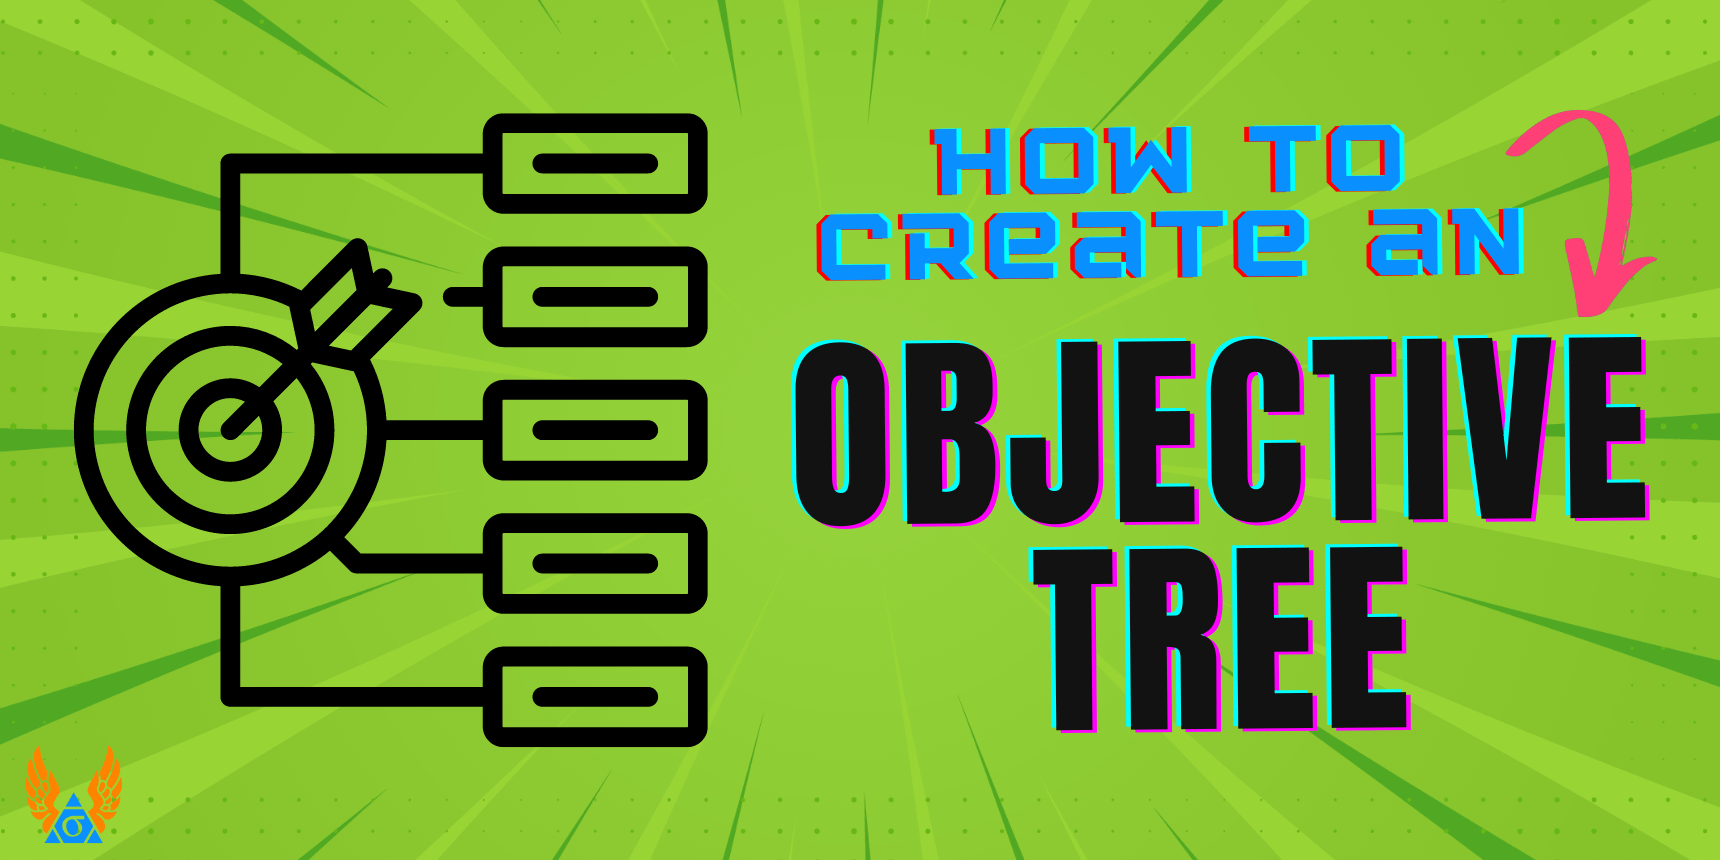 How to Create an Objective Tree with Flying Logic